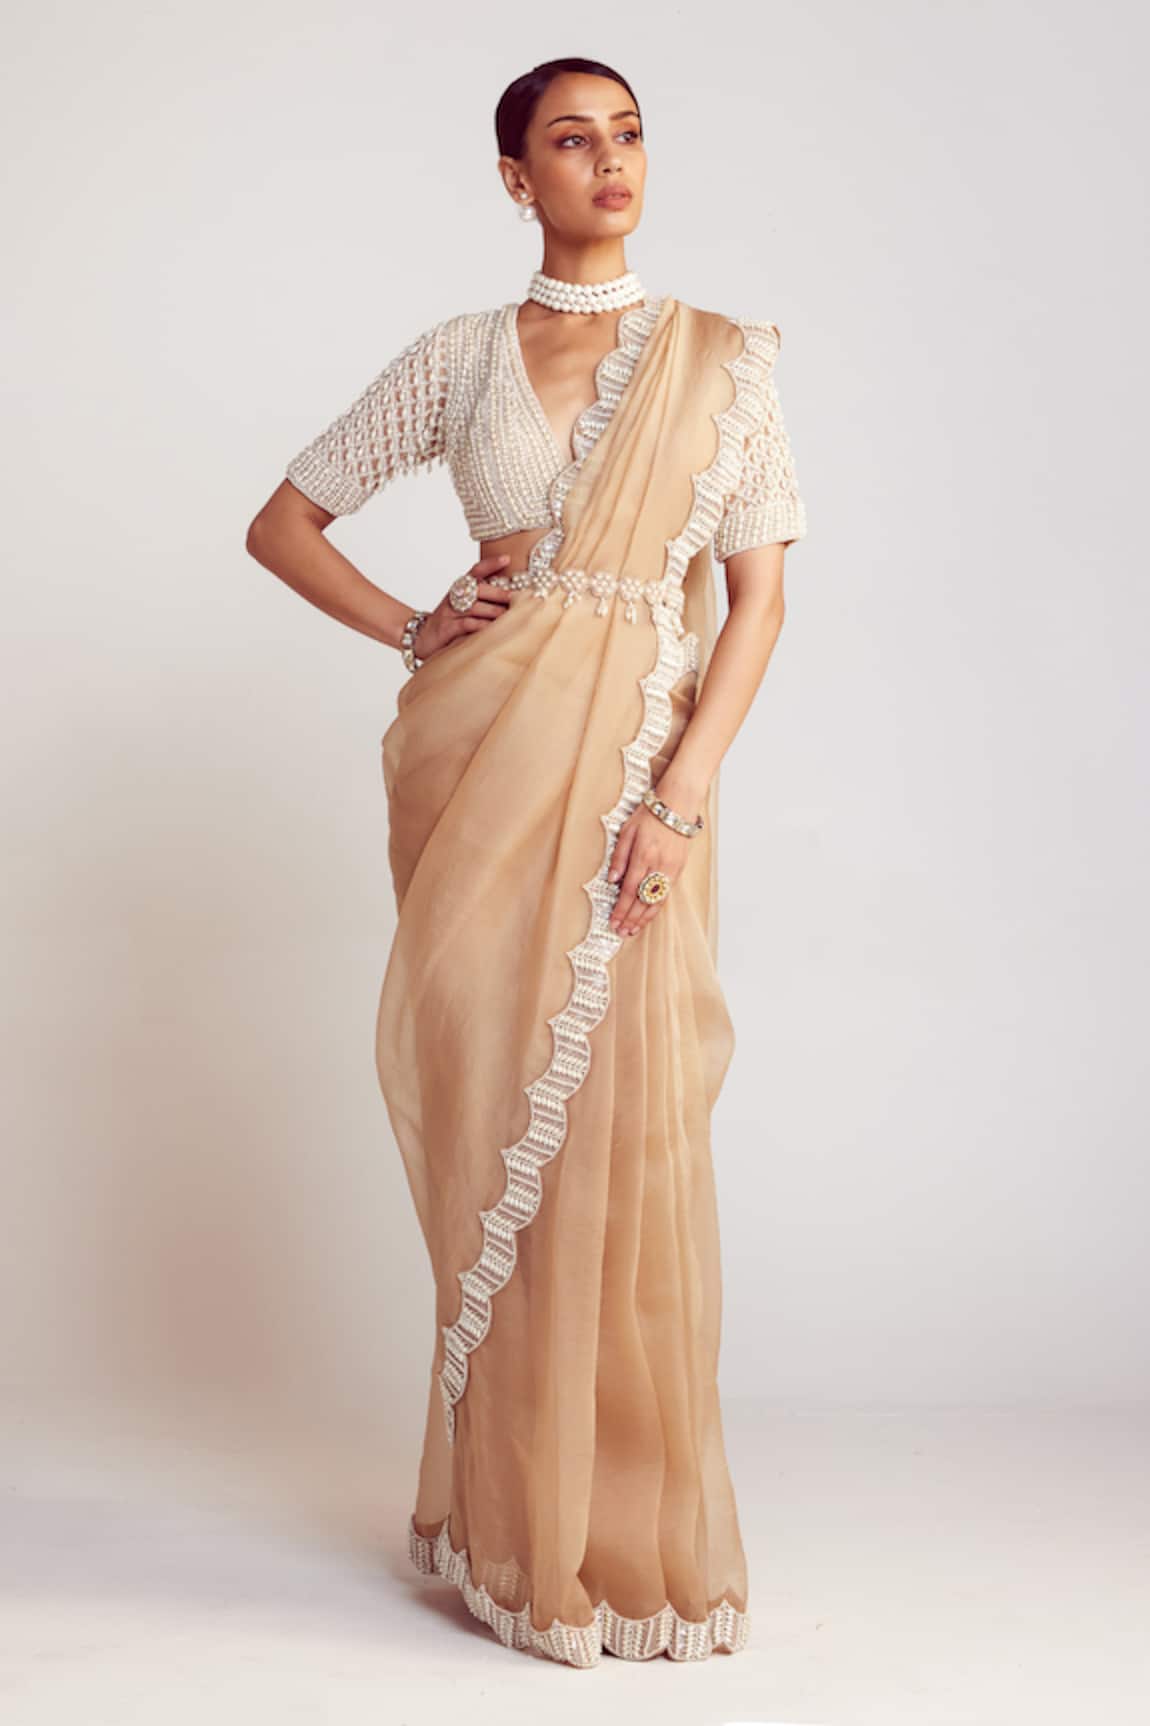 Vvani by Vani Vats Saree With Pearl Drop Embellished Blouse